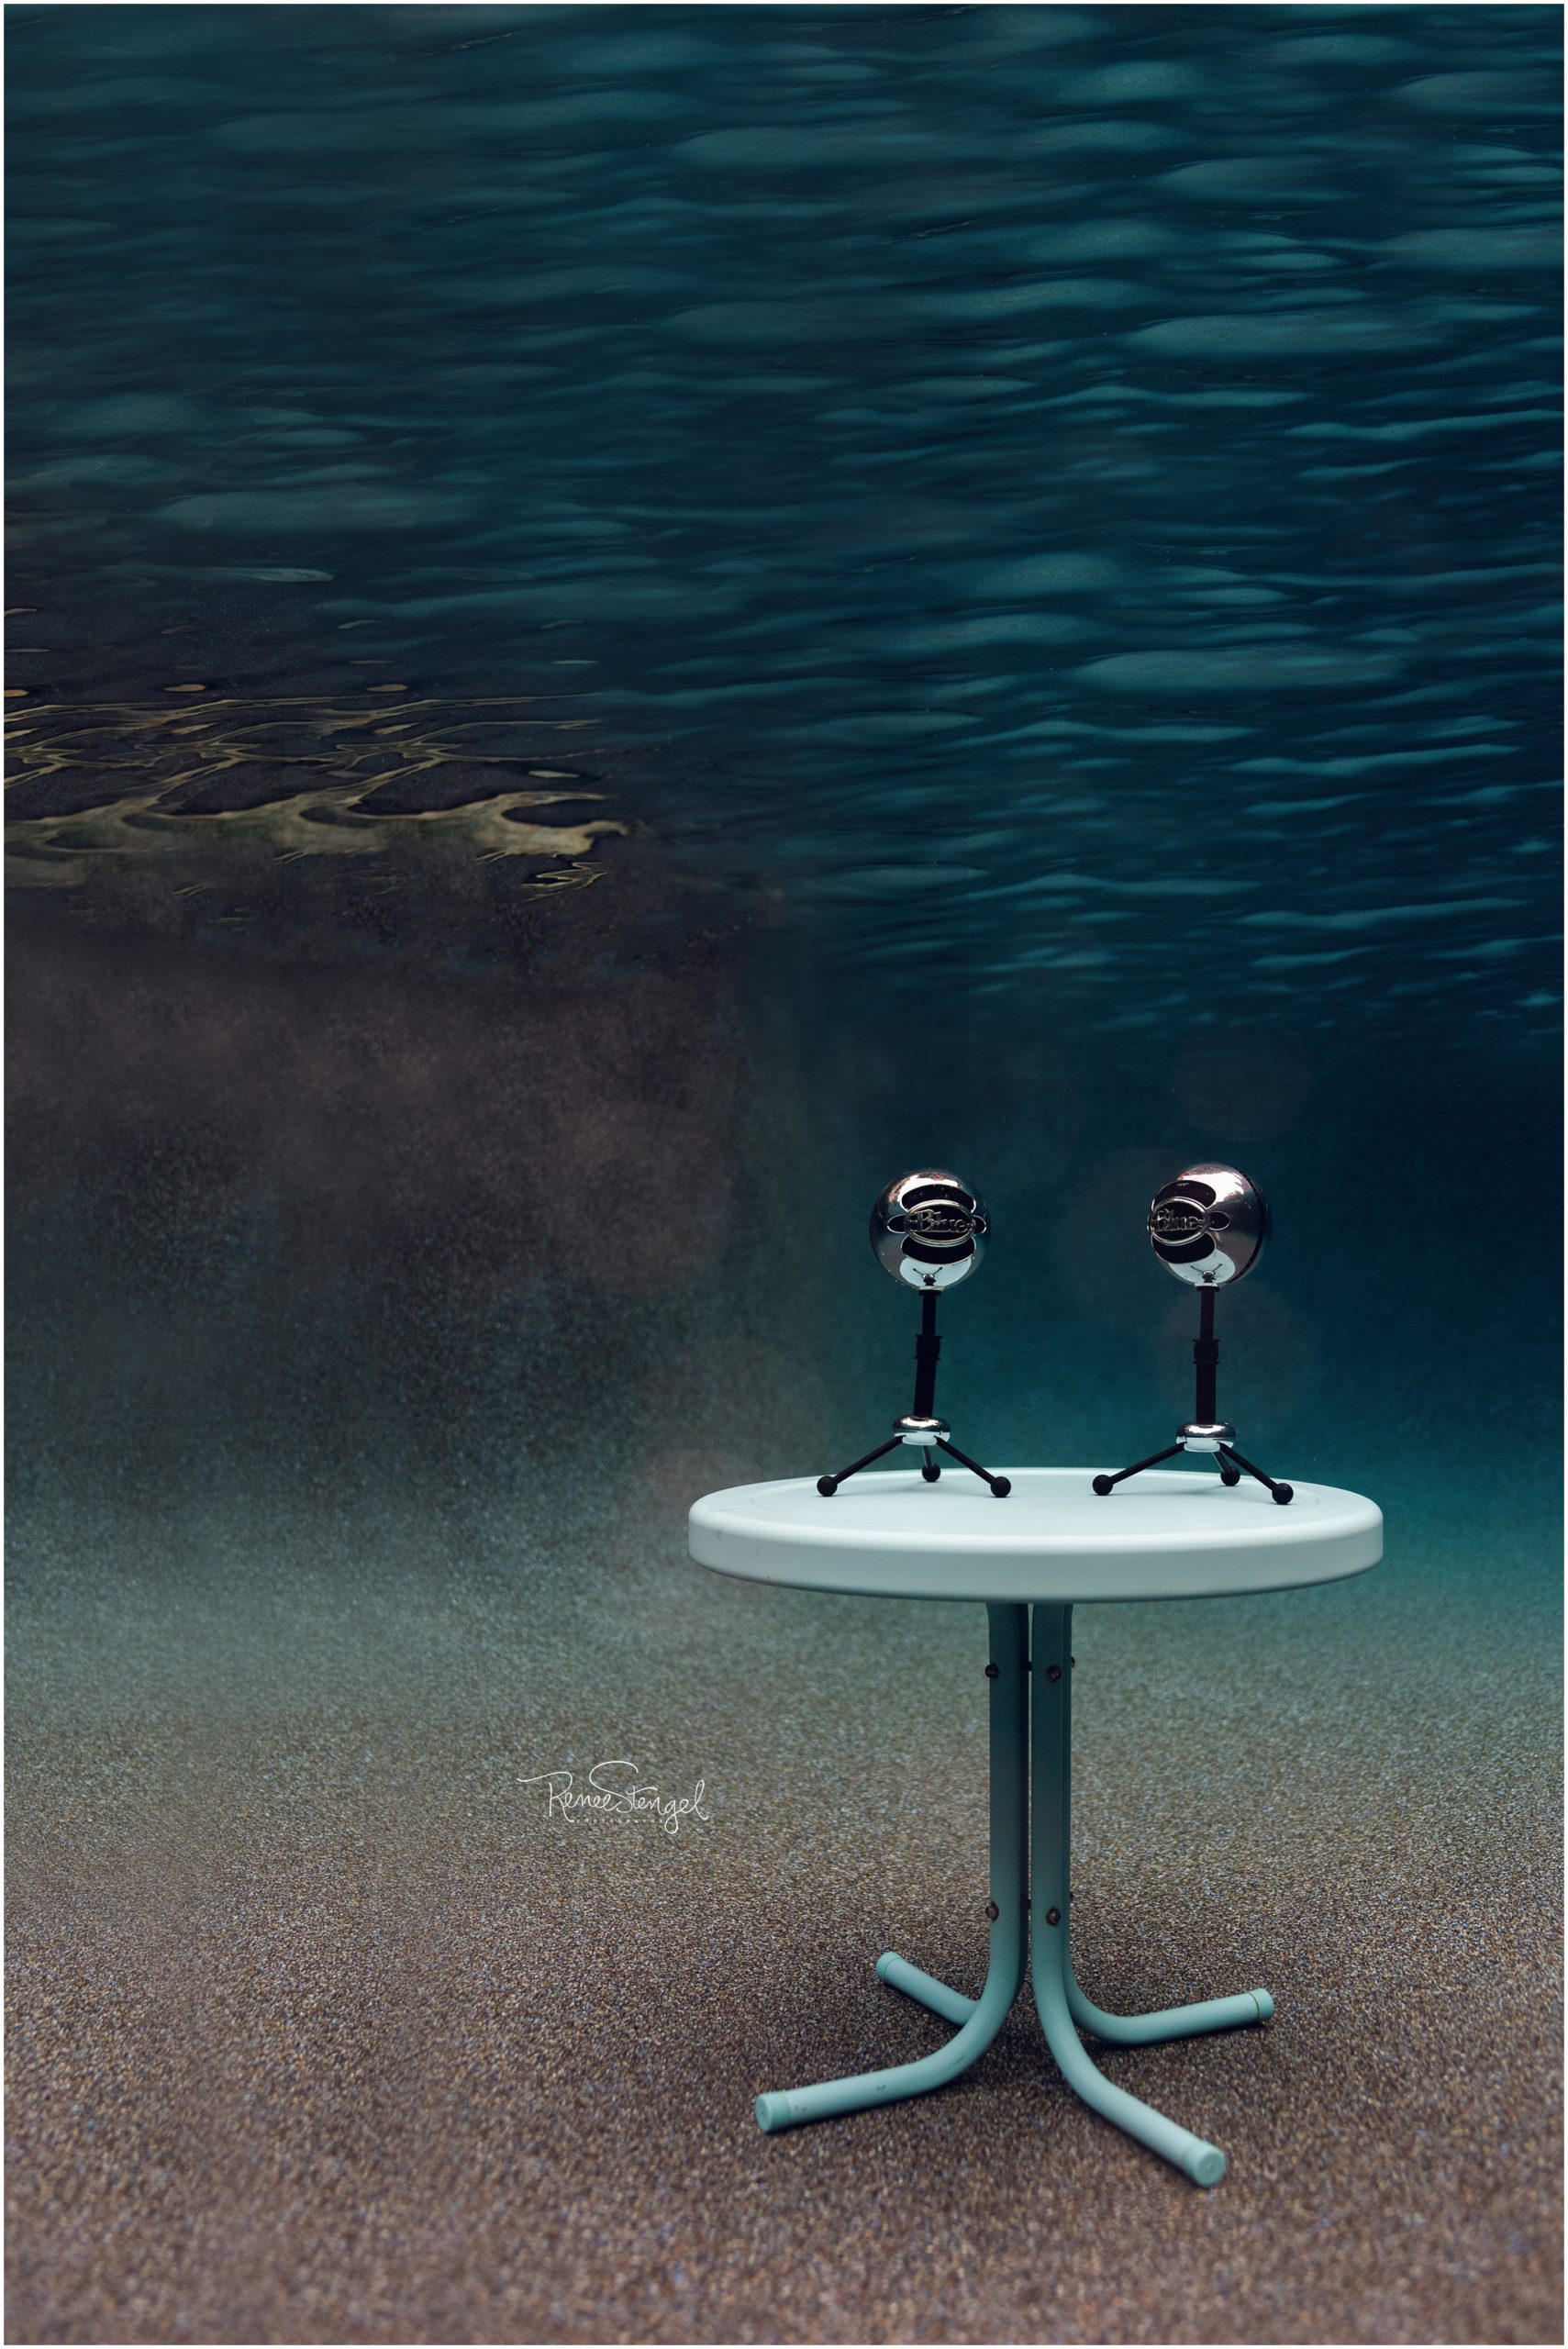 Pair of Blue Snowball Podcast Mics Underwater on Tiffany Blue Table